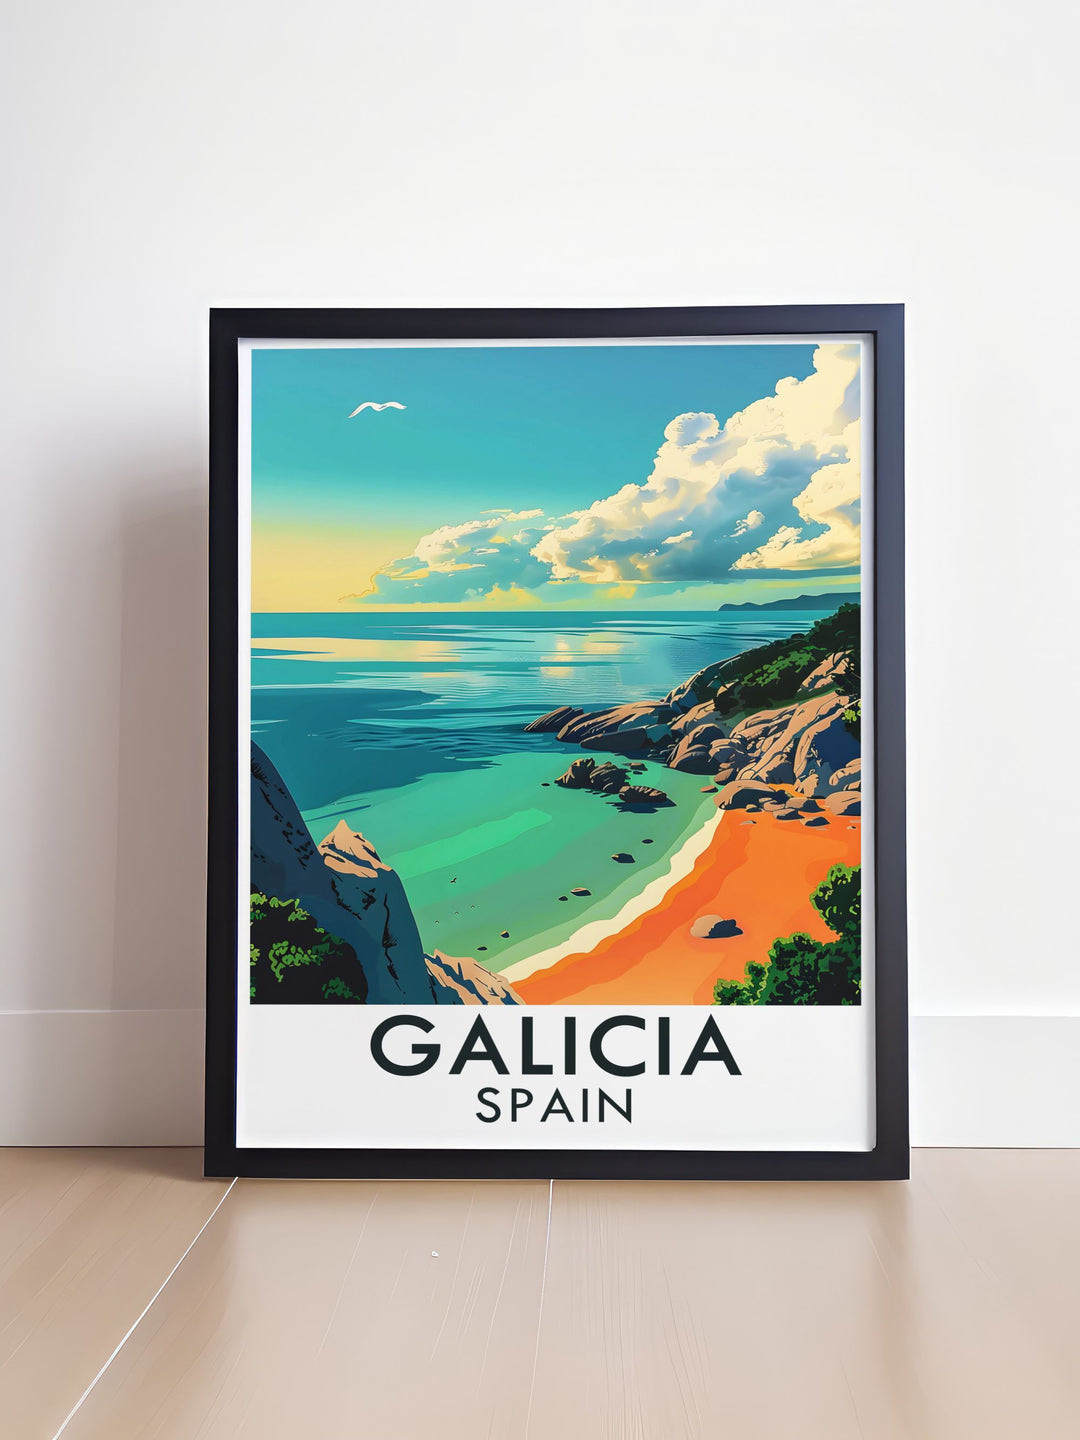 This print captures the pristine beaches and turquoise waters of the Cíes Islands, inviting viewers to explore their natural beauty.